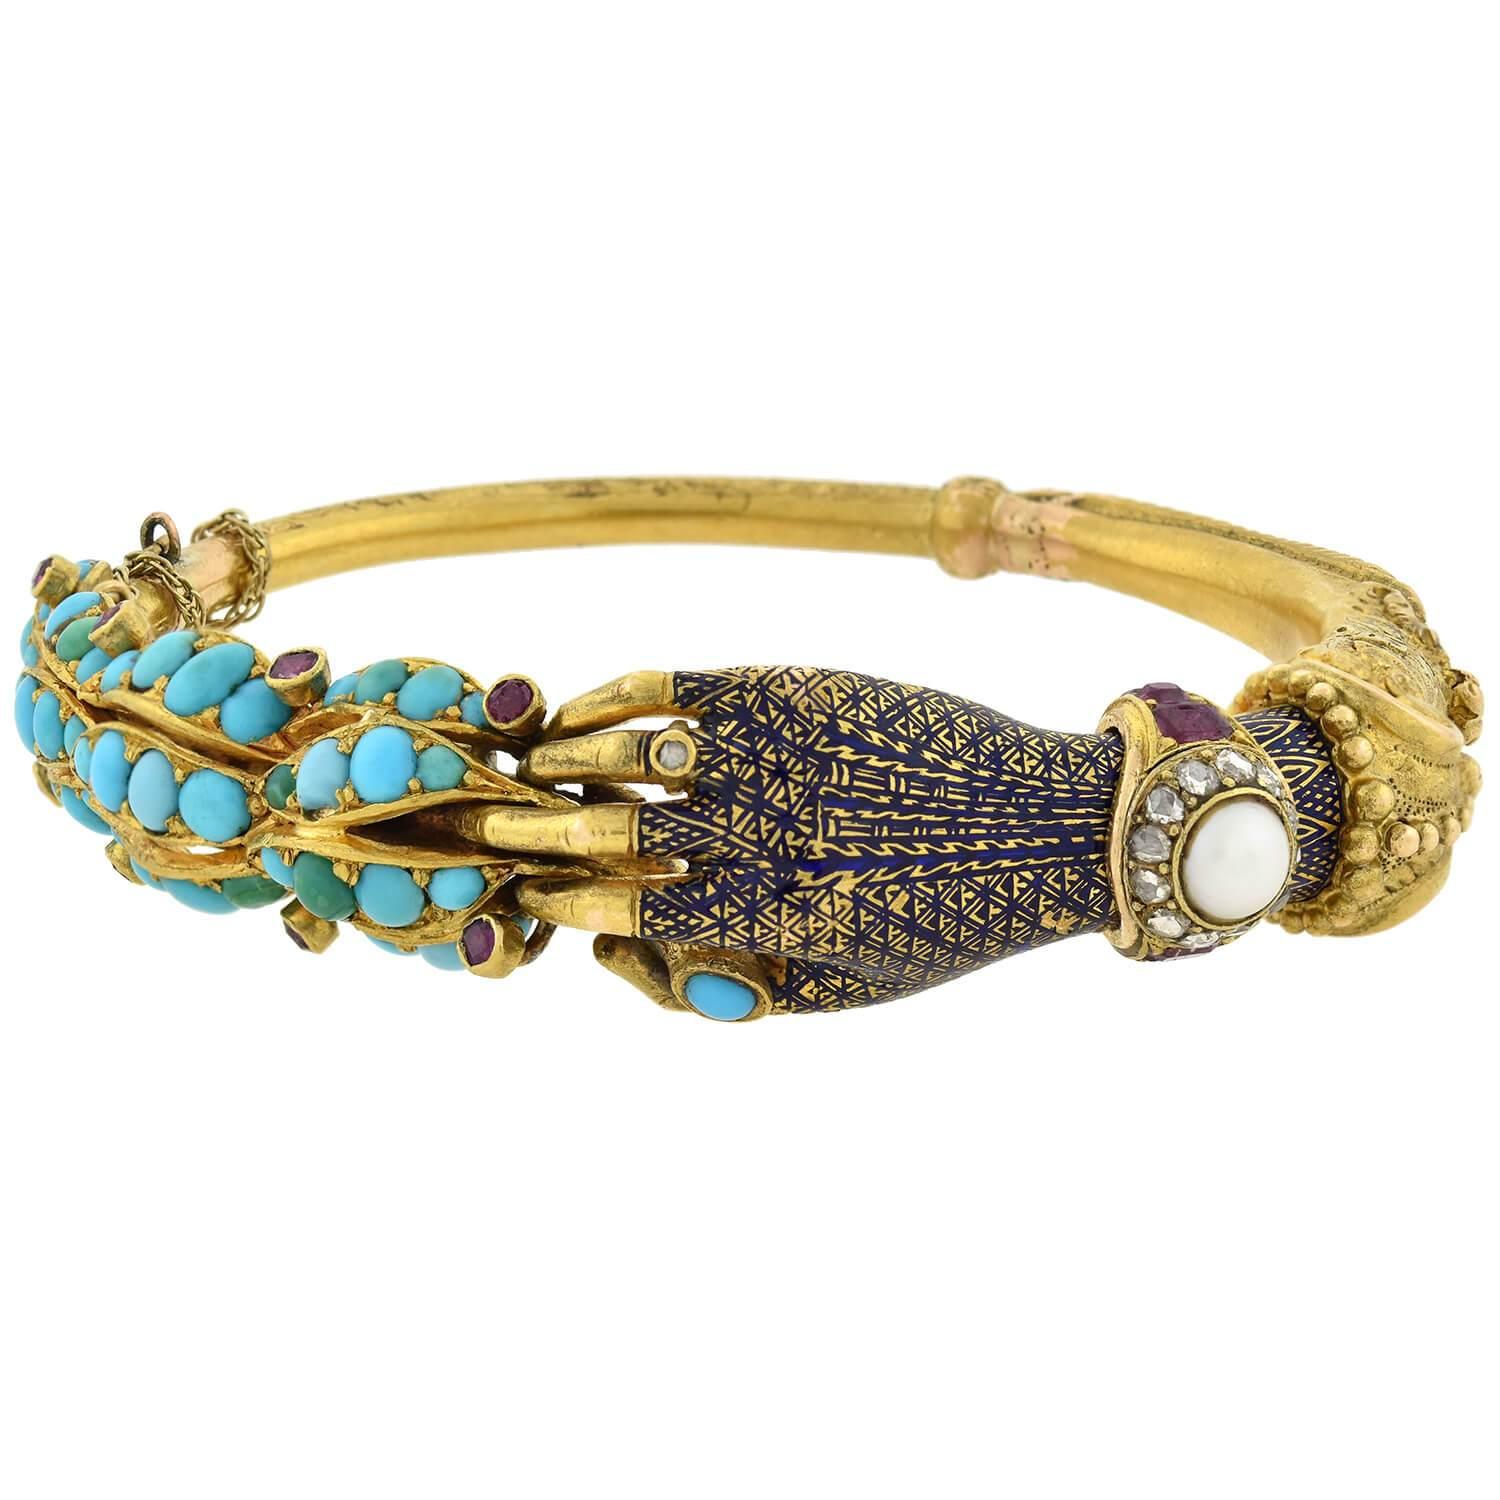 An absolutely breathtaking bracelet from the Victorian (ca1880s) era! Crafted in vibrant 18kt yellow gold, this gorgeous piece displays a 3-dimensional motif of a hand holding an elongated floral stem. The detailed, feminine hand is decorated with